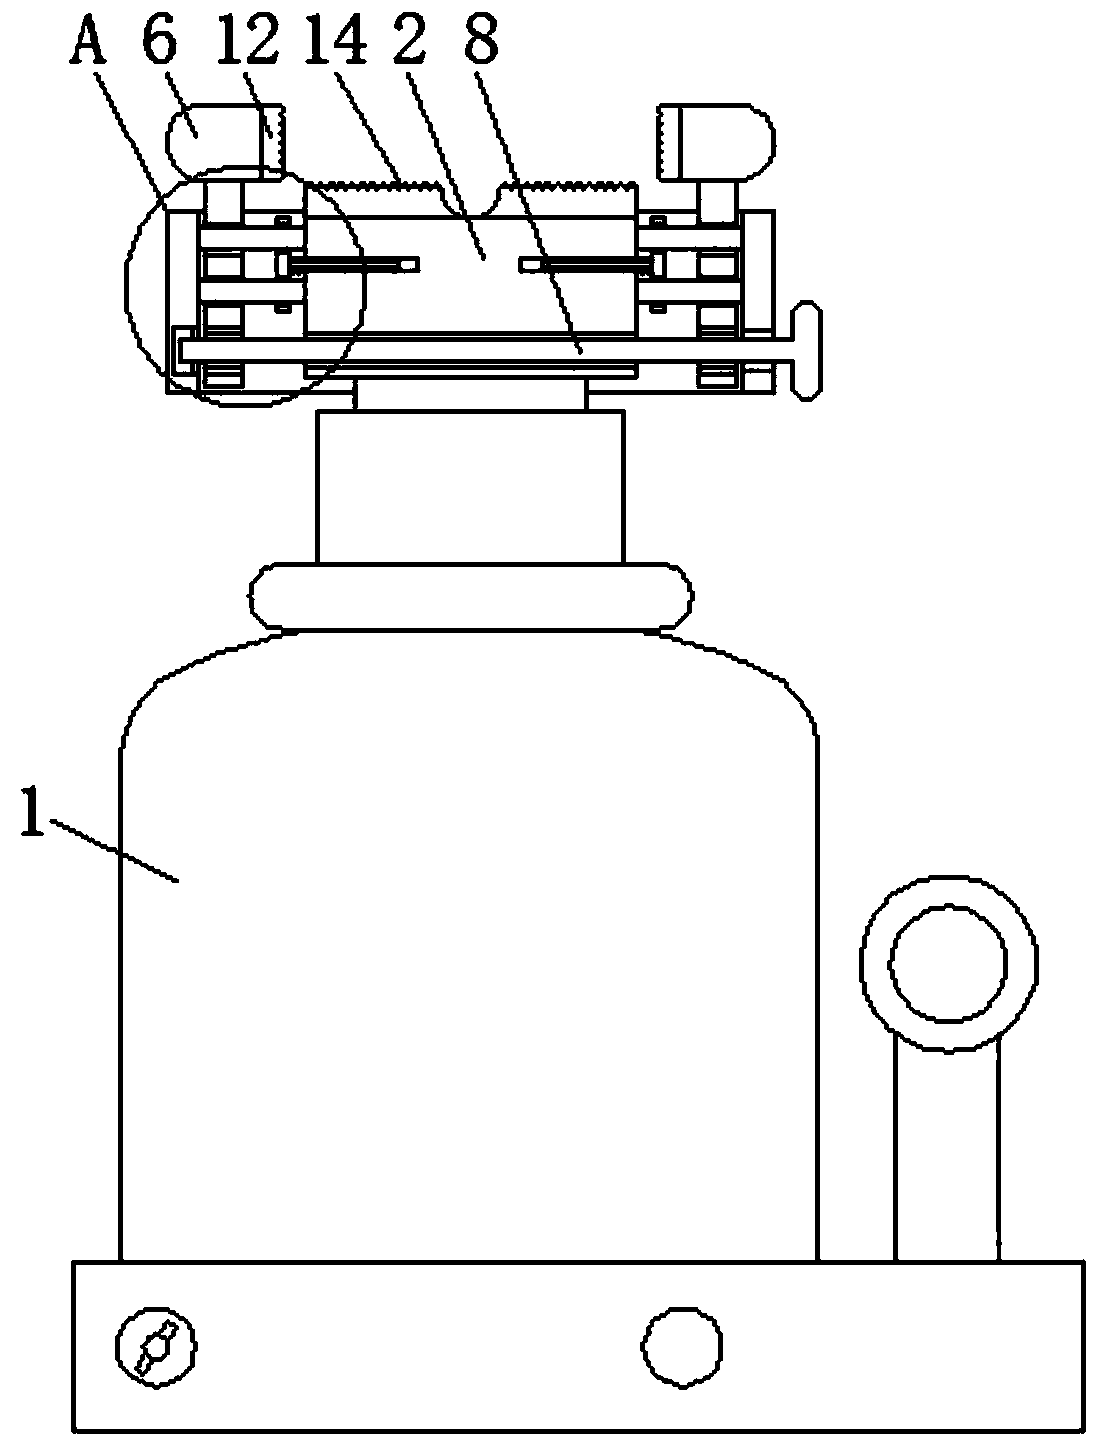 Top disk lockable hydraulic jack with safety valve